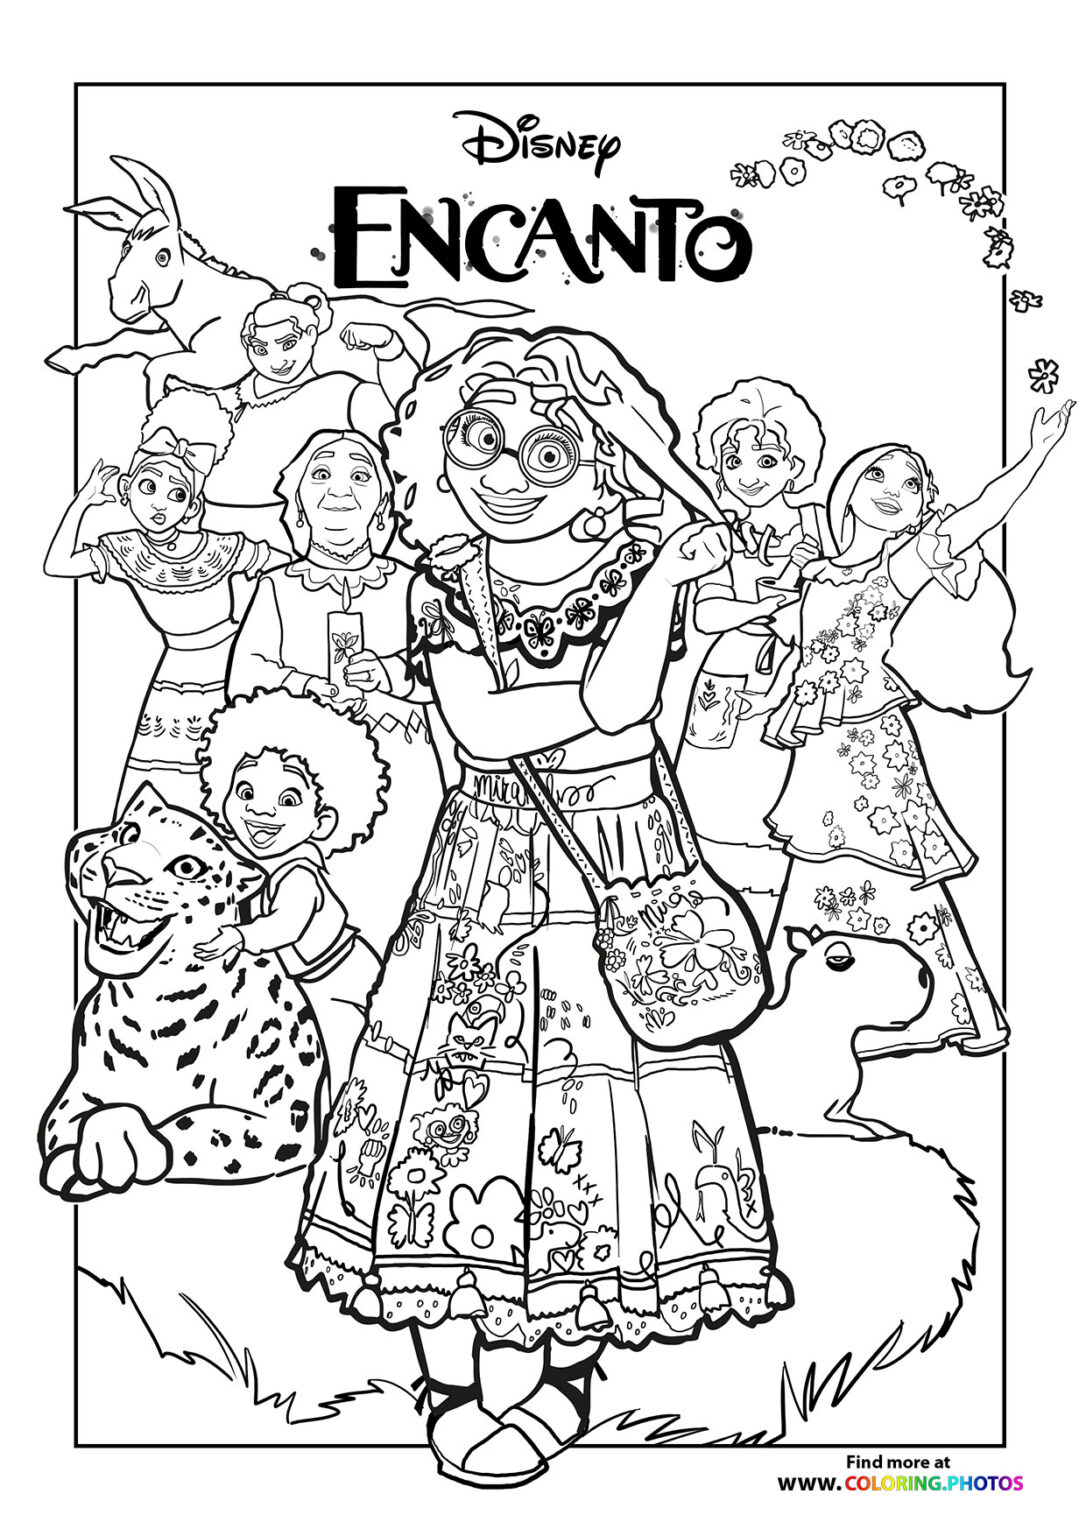 Encanto Madrigal family   Coloring Pages for kids